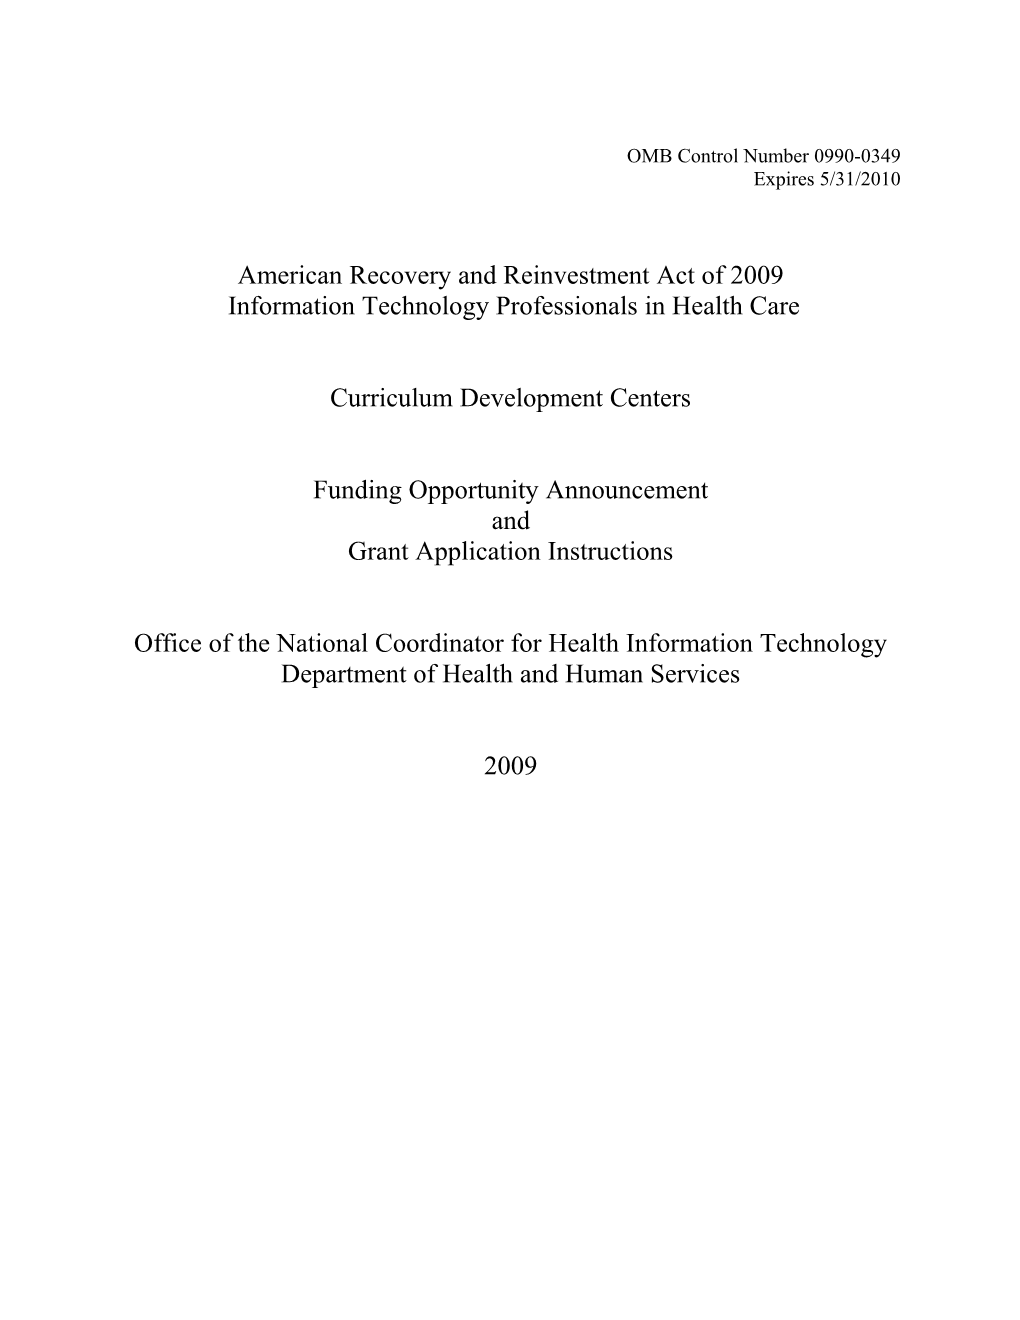 Department Of Health And Human Services (HHS)